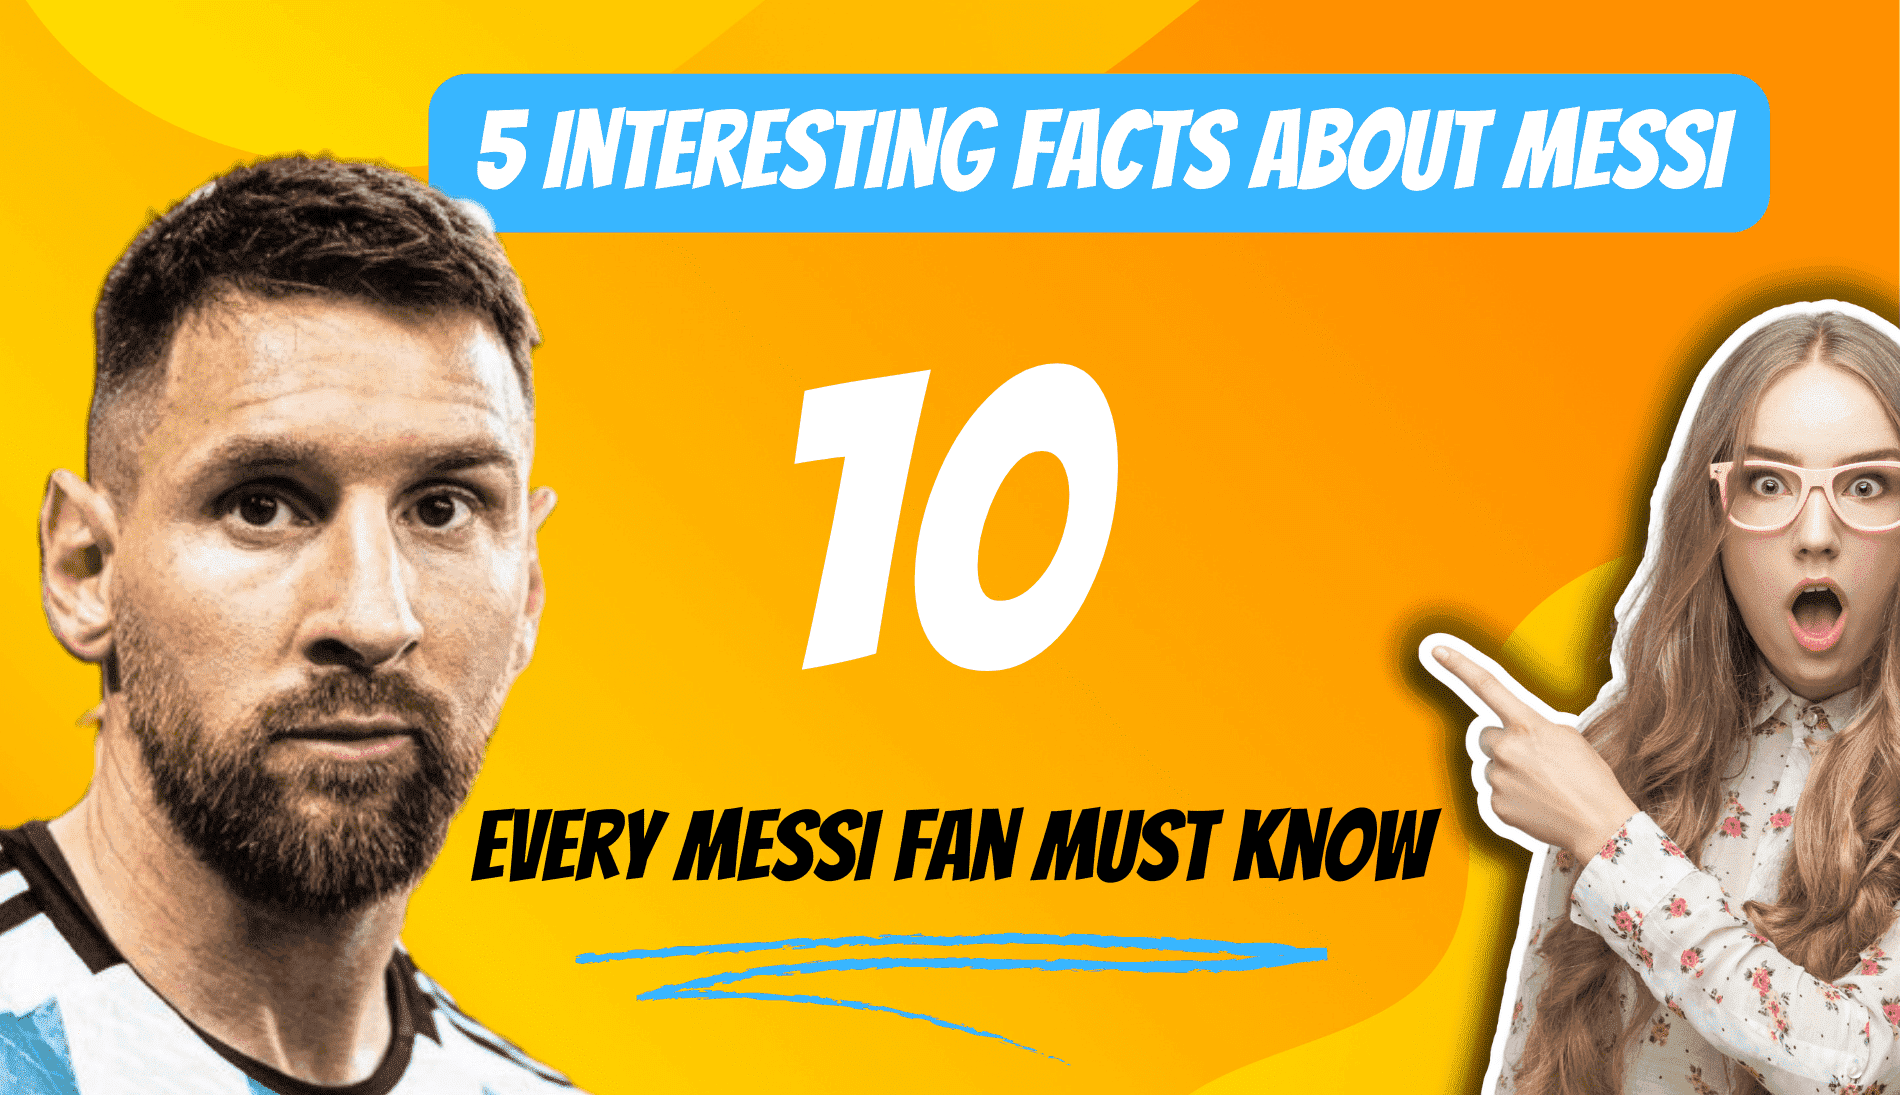 5 interesting facts about Messi